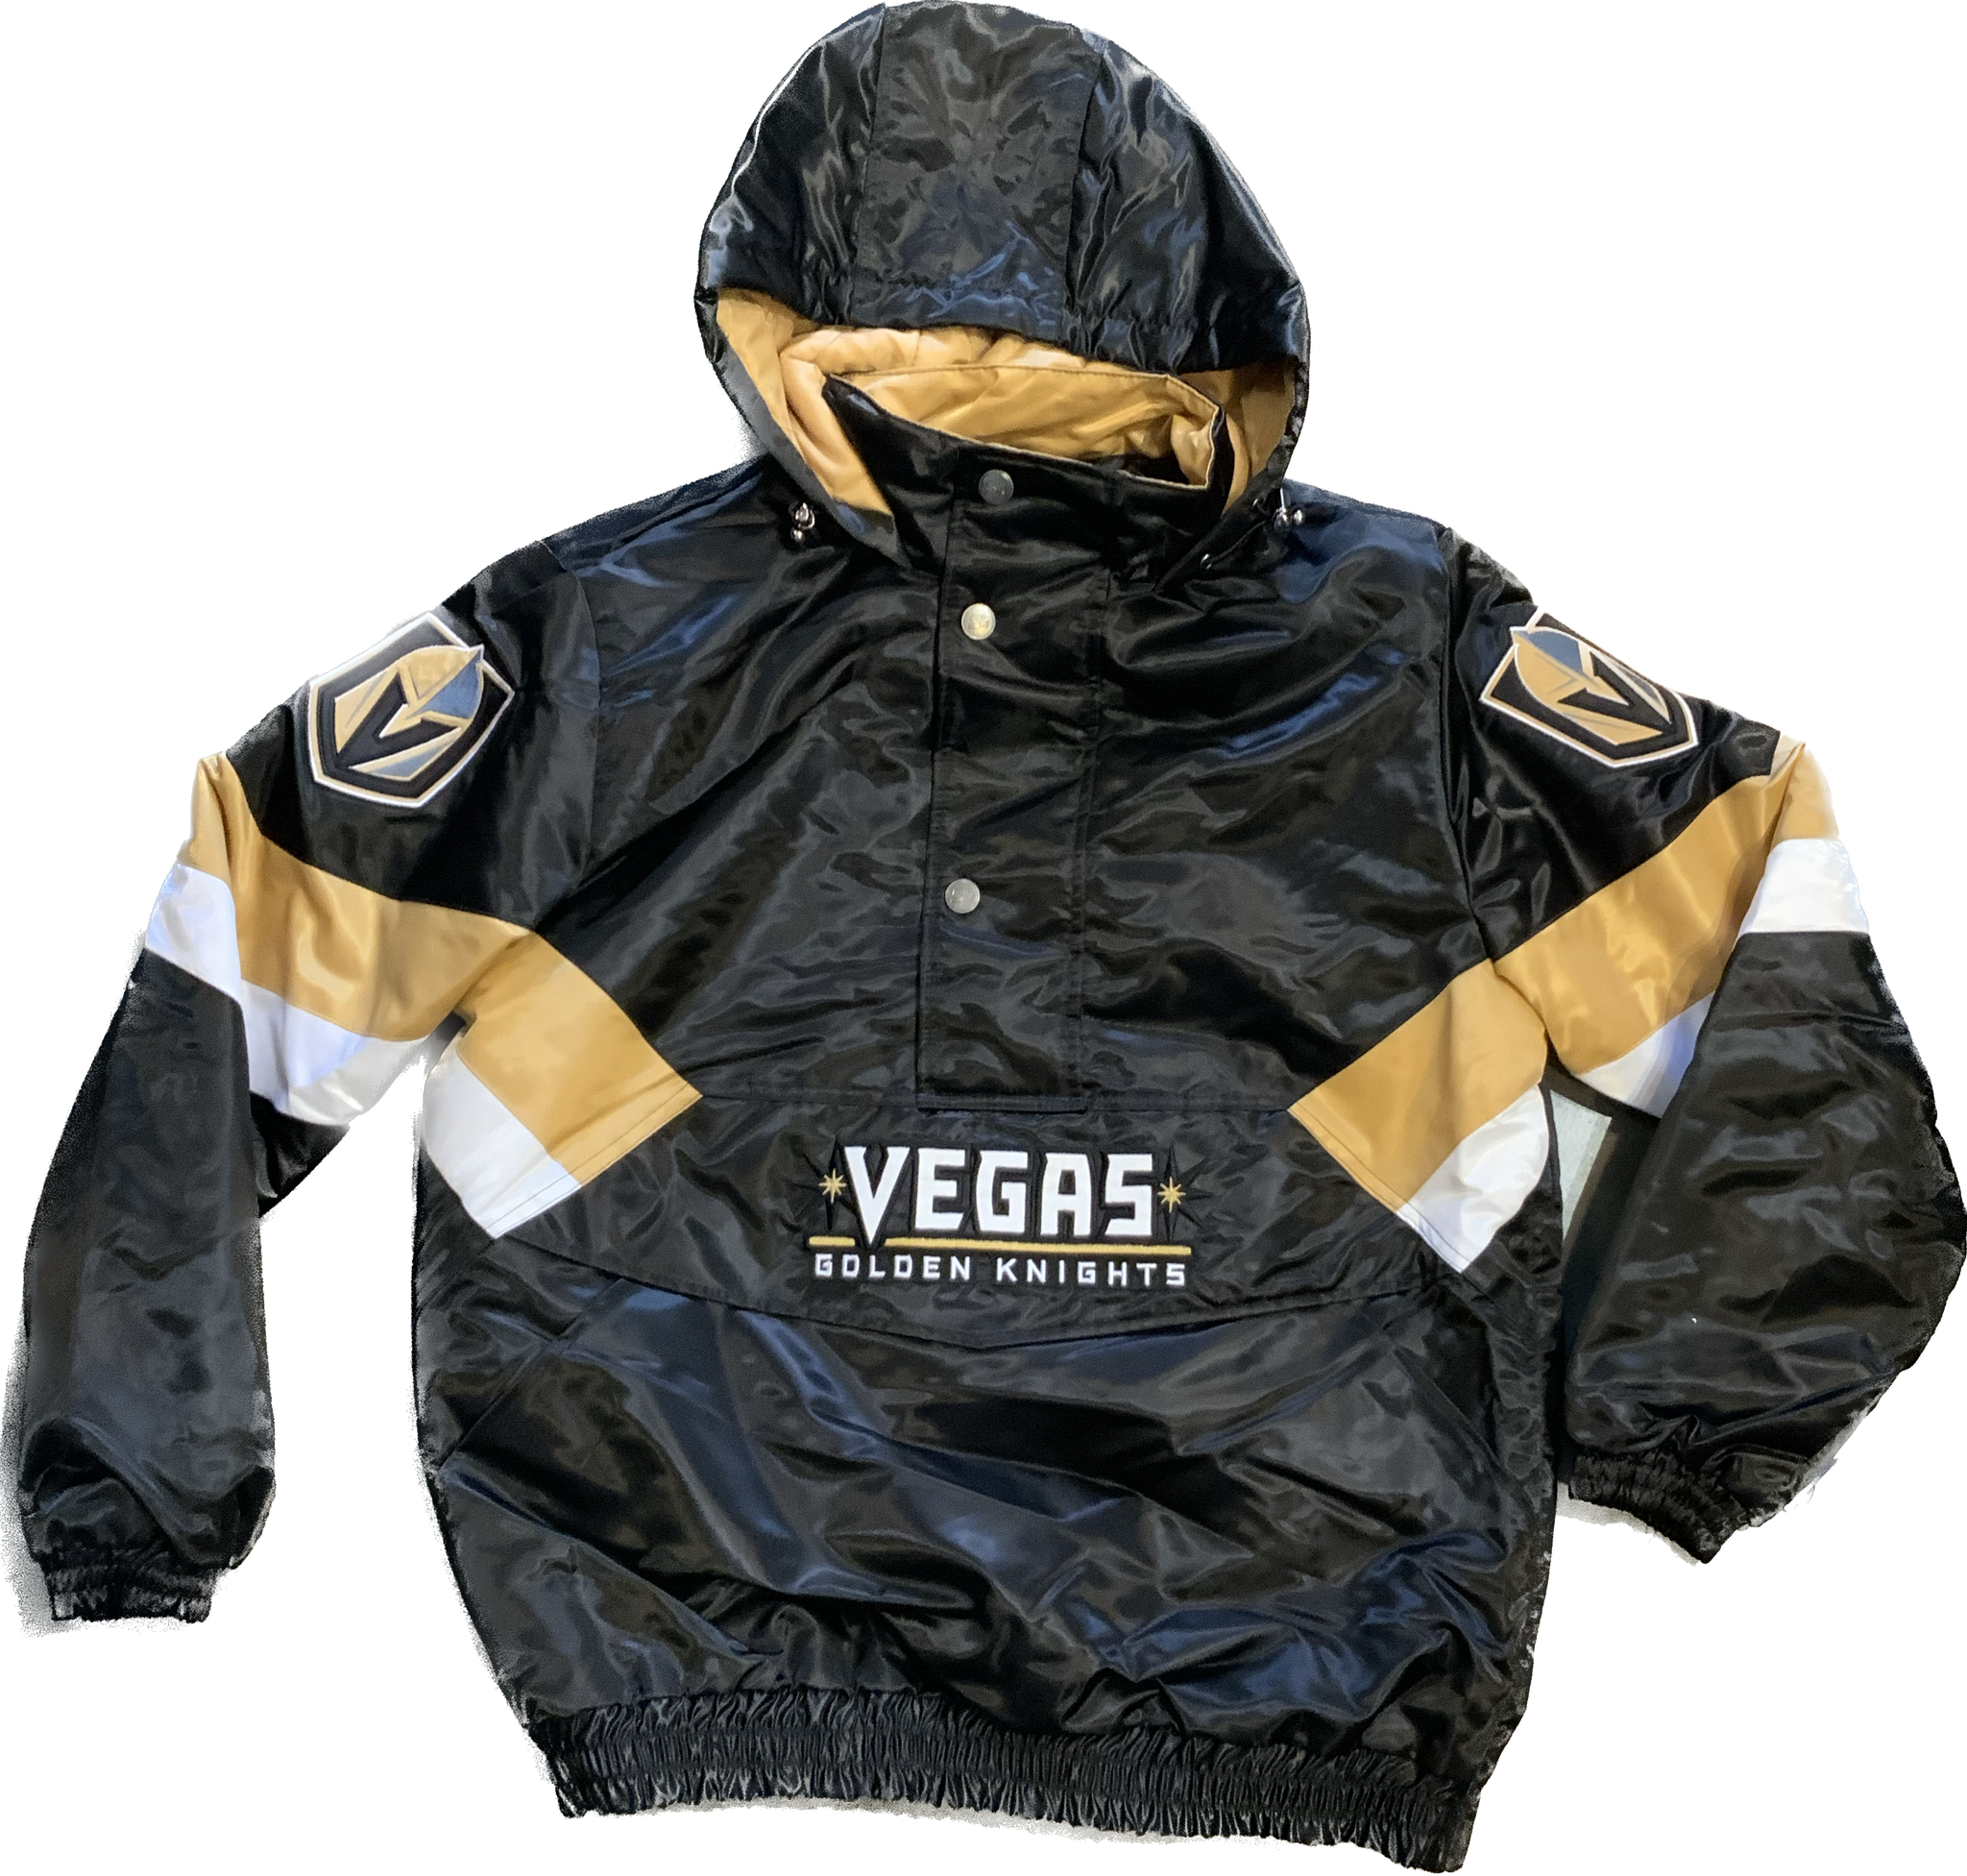 Vegas Golden Knights Satin Hood Jacket With Front Pouch